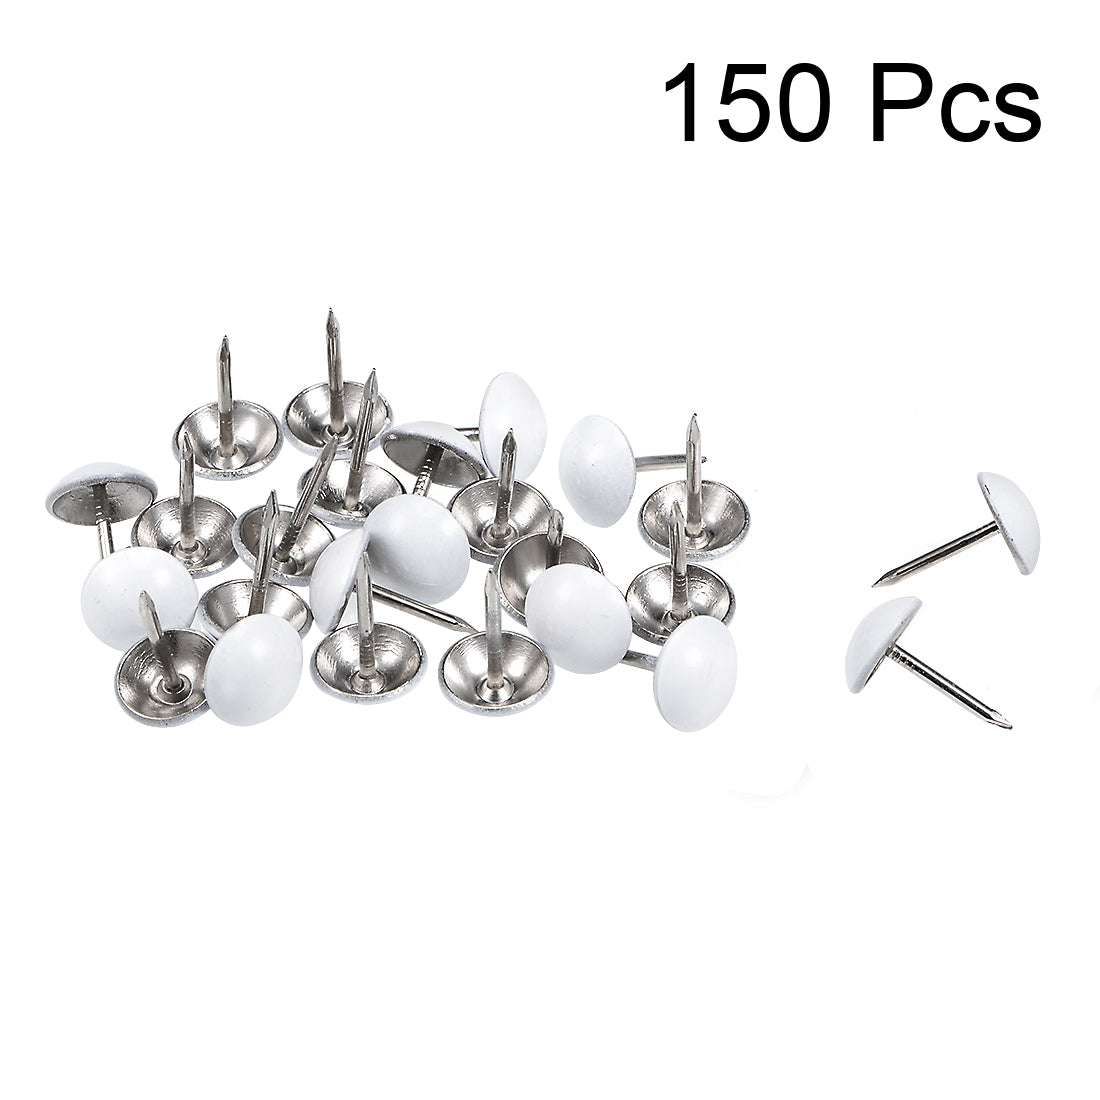 uxcell Uxcell Upholstery Nails Tacks 11mm White Round Head 17mm Length Thumb Push Pins 150 Pcs